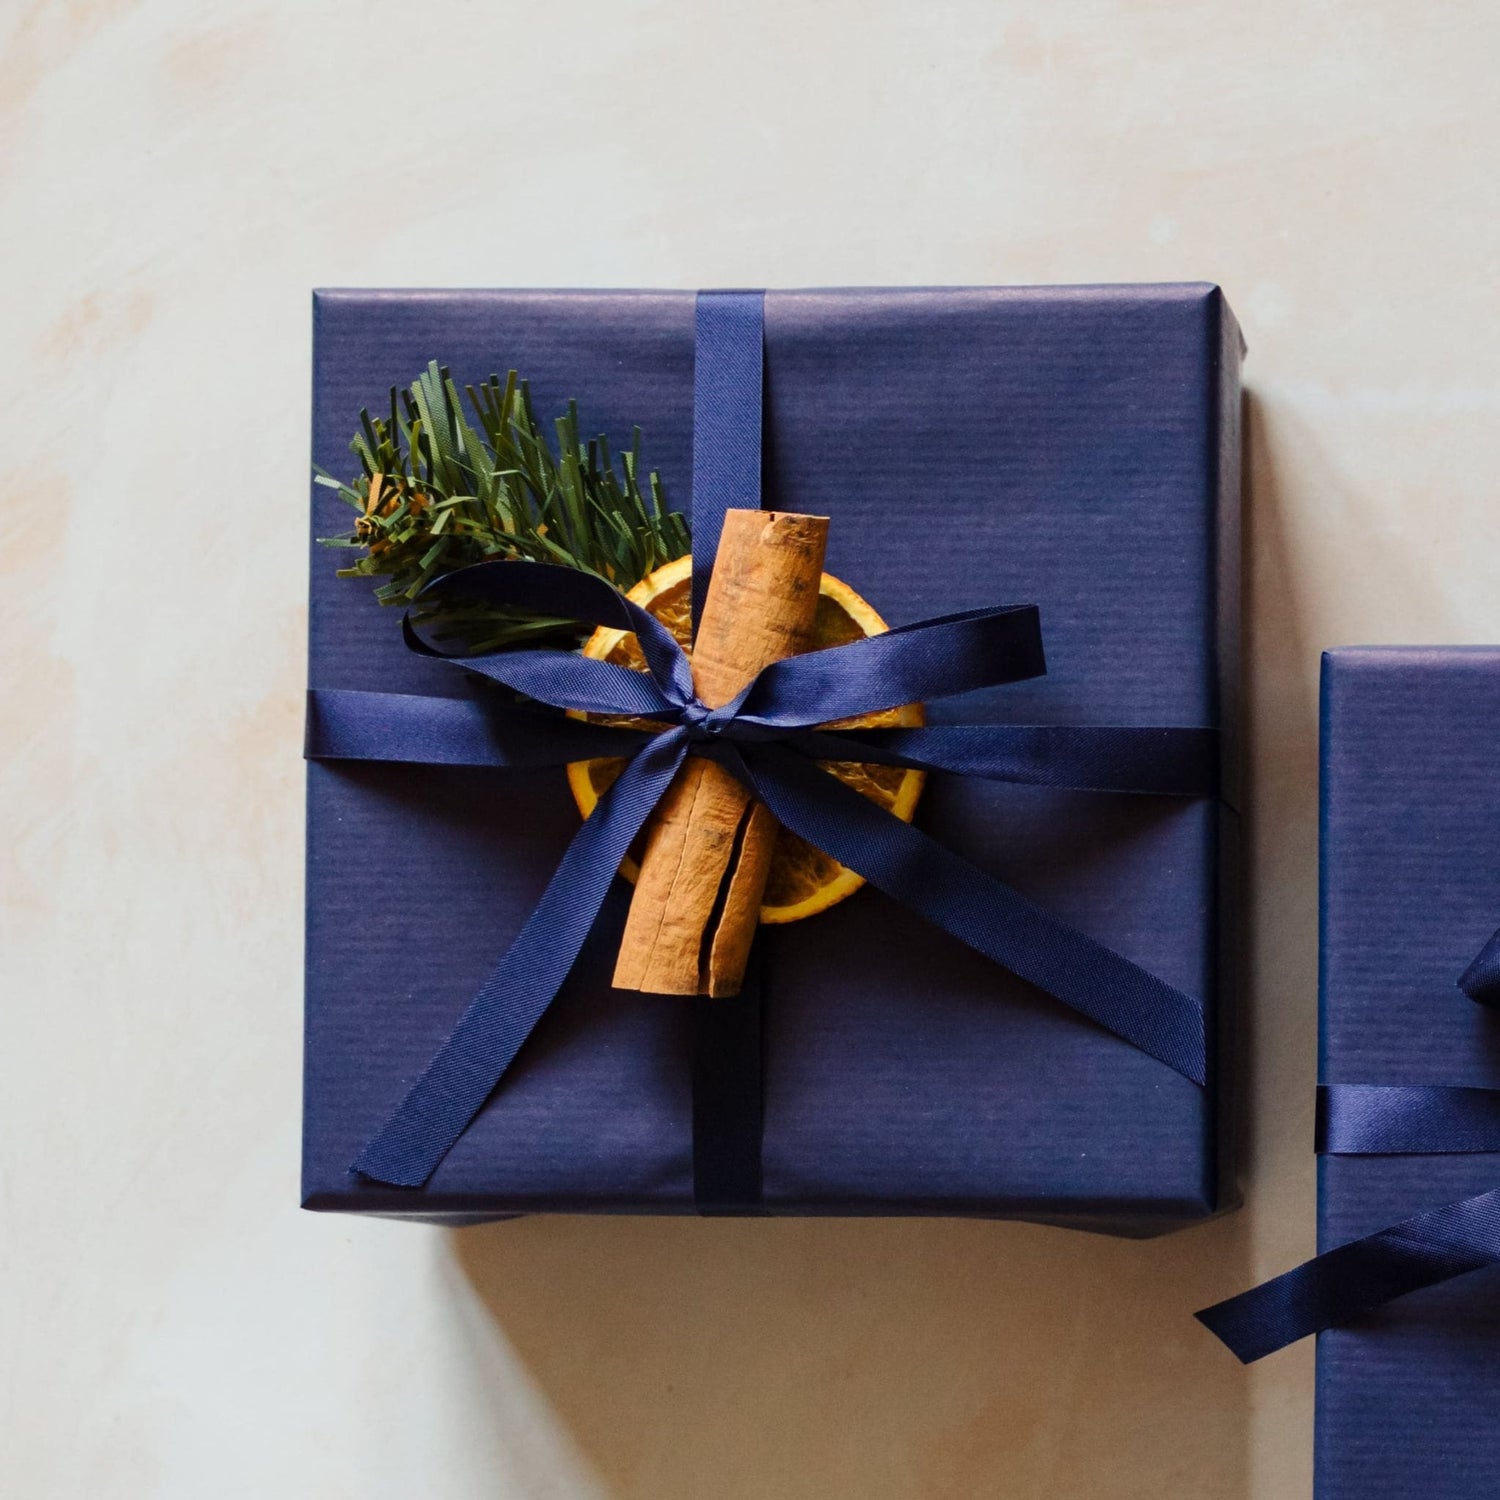 A 400g sweet 3 wick soy candle from the Home County Co. is shown with luxury Christmas Gift Wrap. The 3 wick candle is wrapped in luxury navy wrapping paper secured with navy ribbon and Christmas embellishments.